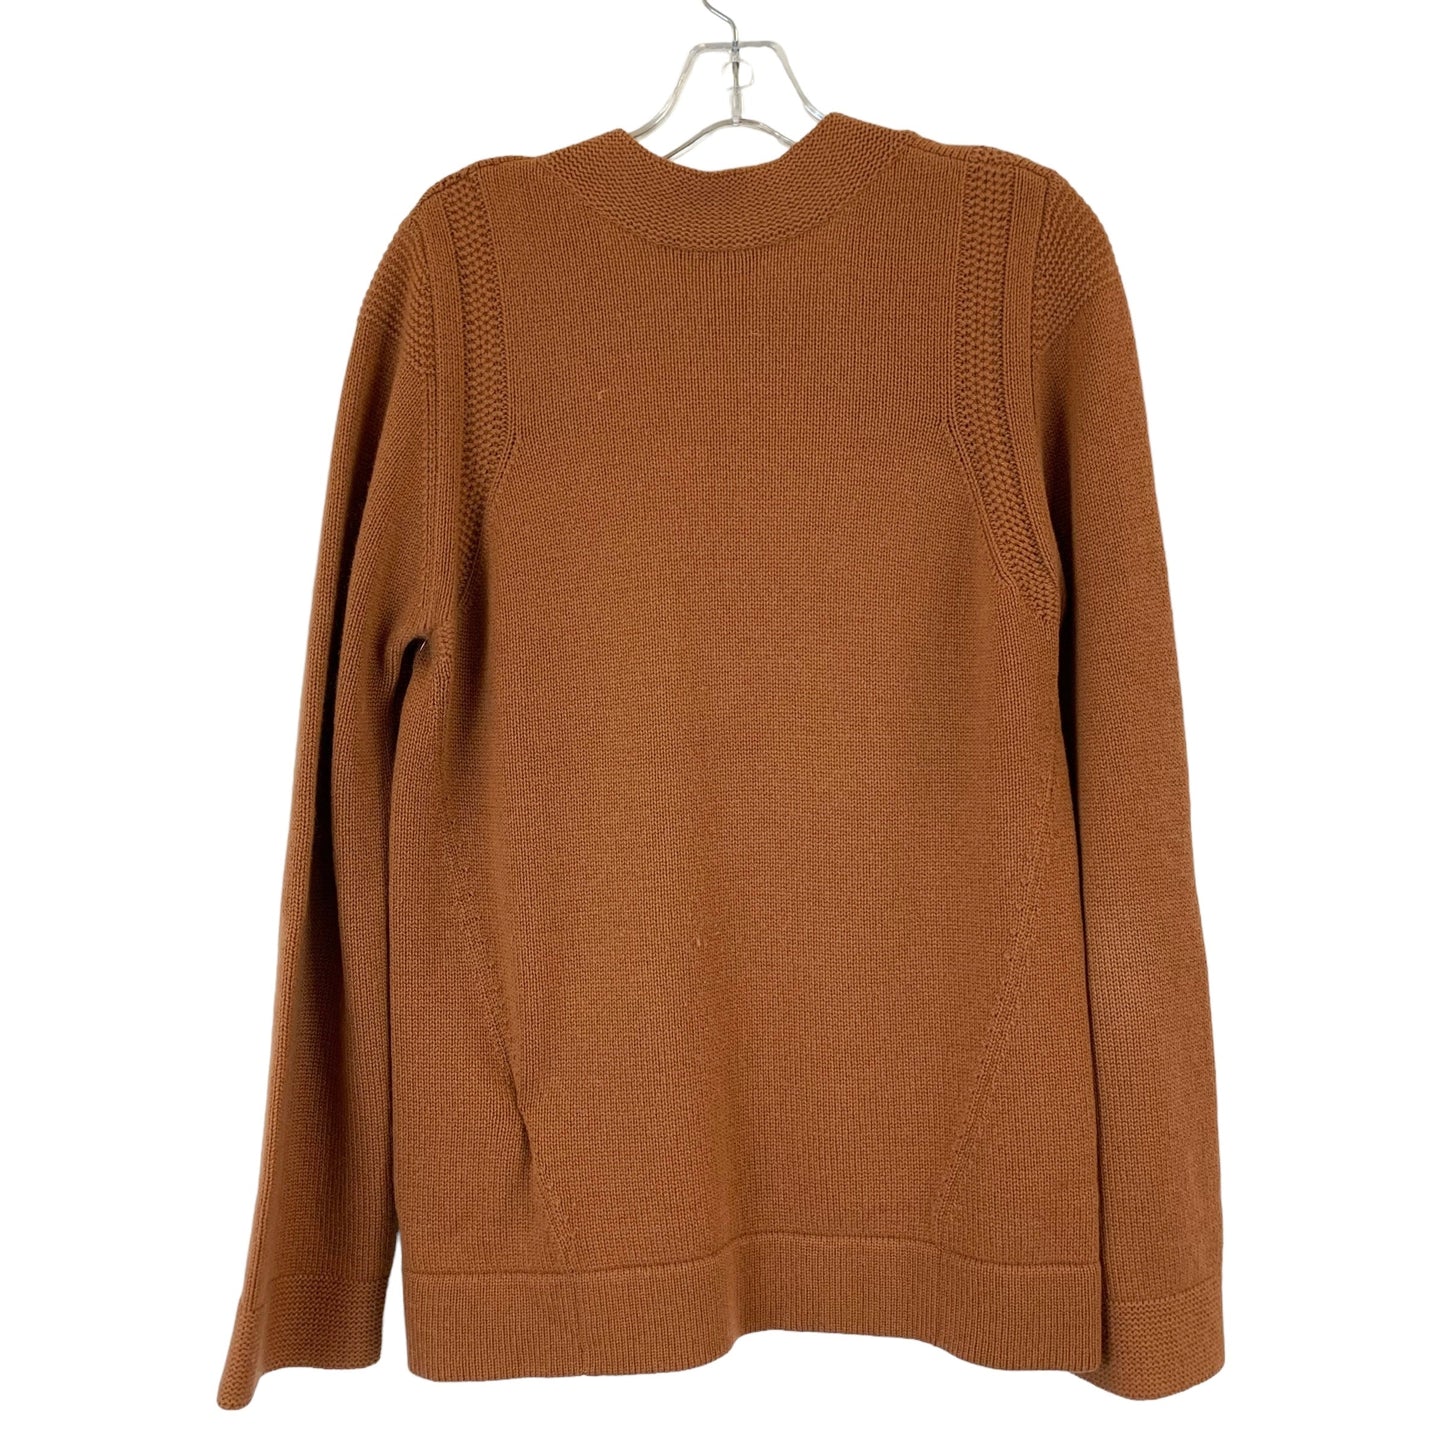 Sweater Cashmere By Lutz & Patmos  Size: L